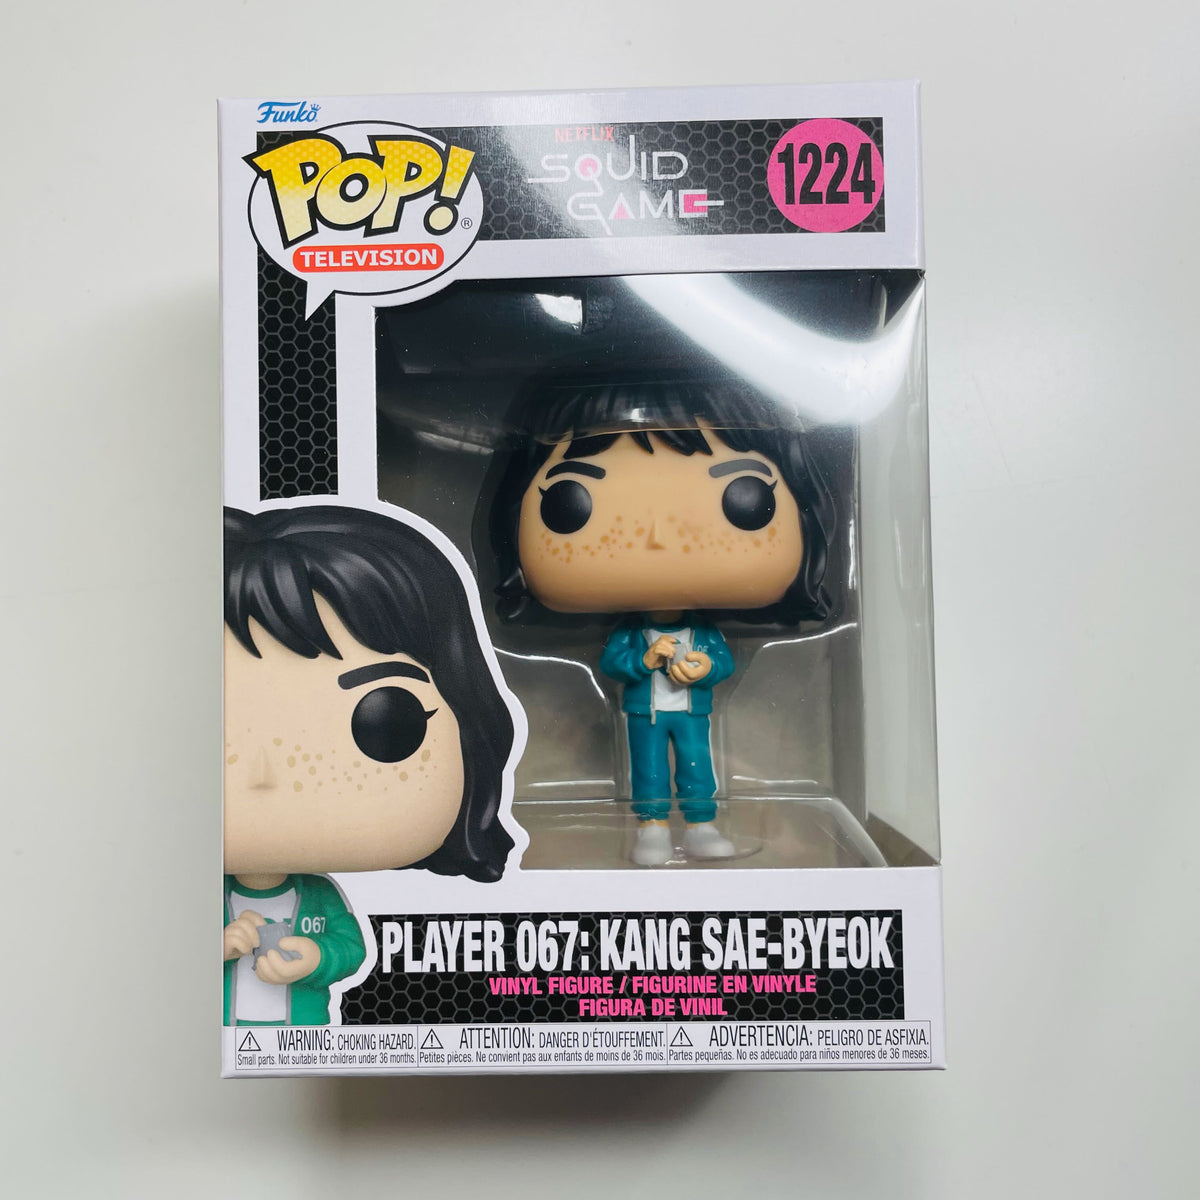 Funko Pop! Television: Squid Game Collectors Set - Netflix 3 Figure Set  Includes: Player 456, Player 001, and Masked Worker